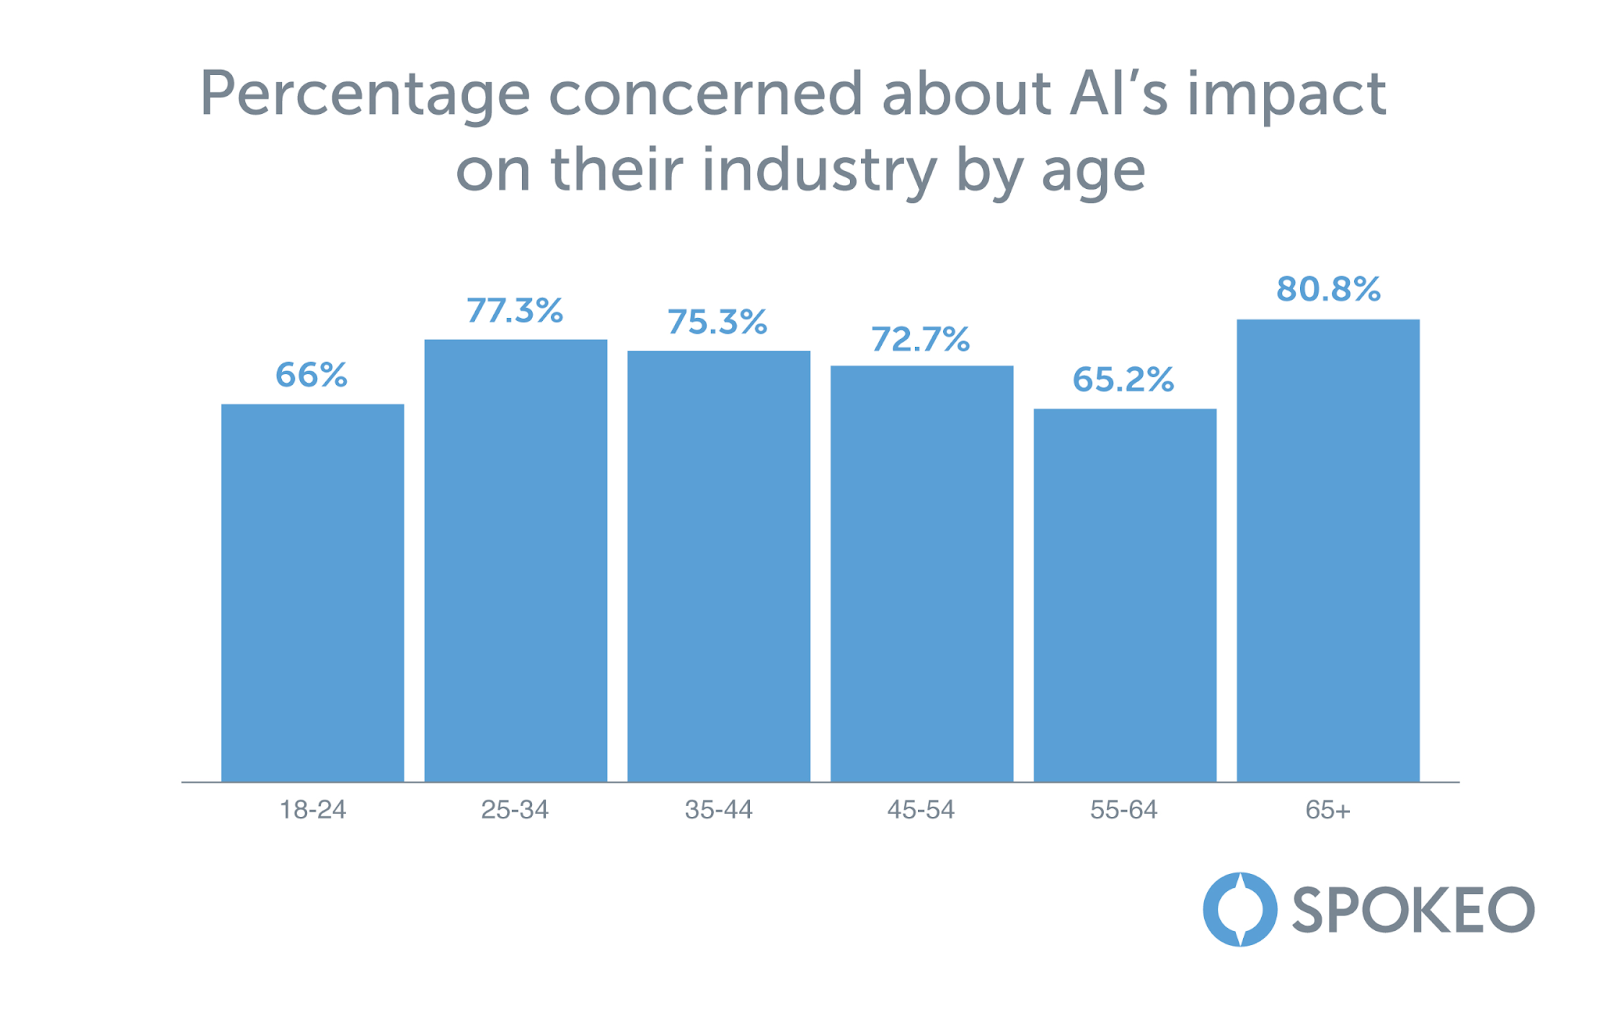 Image of a graph showing percentage concerned about AI’s impact on their industry by age.